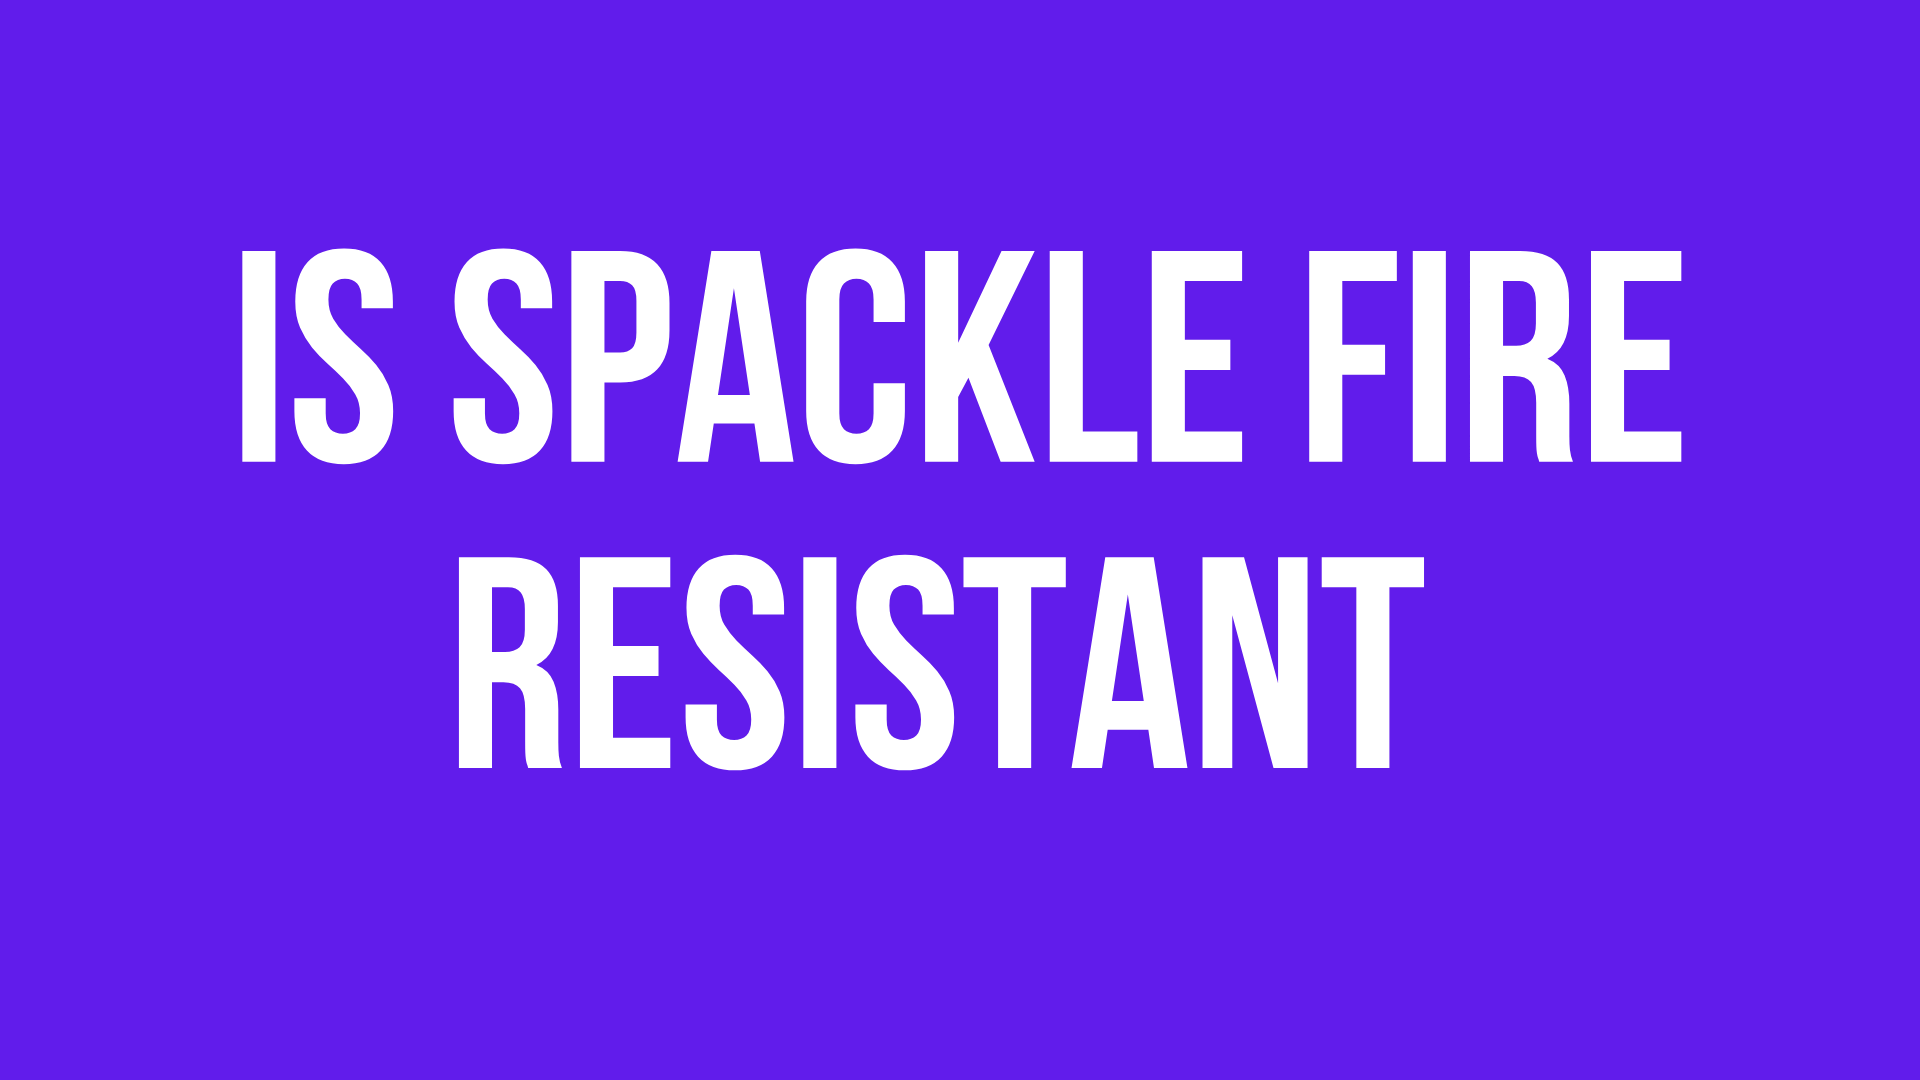 Is Spackle fire resistant